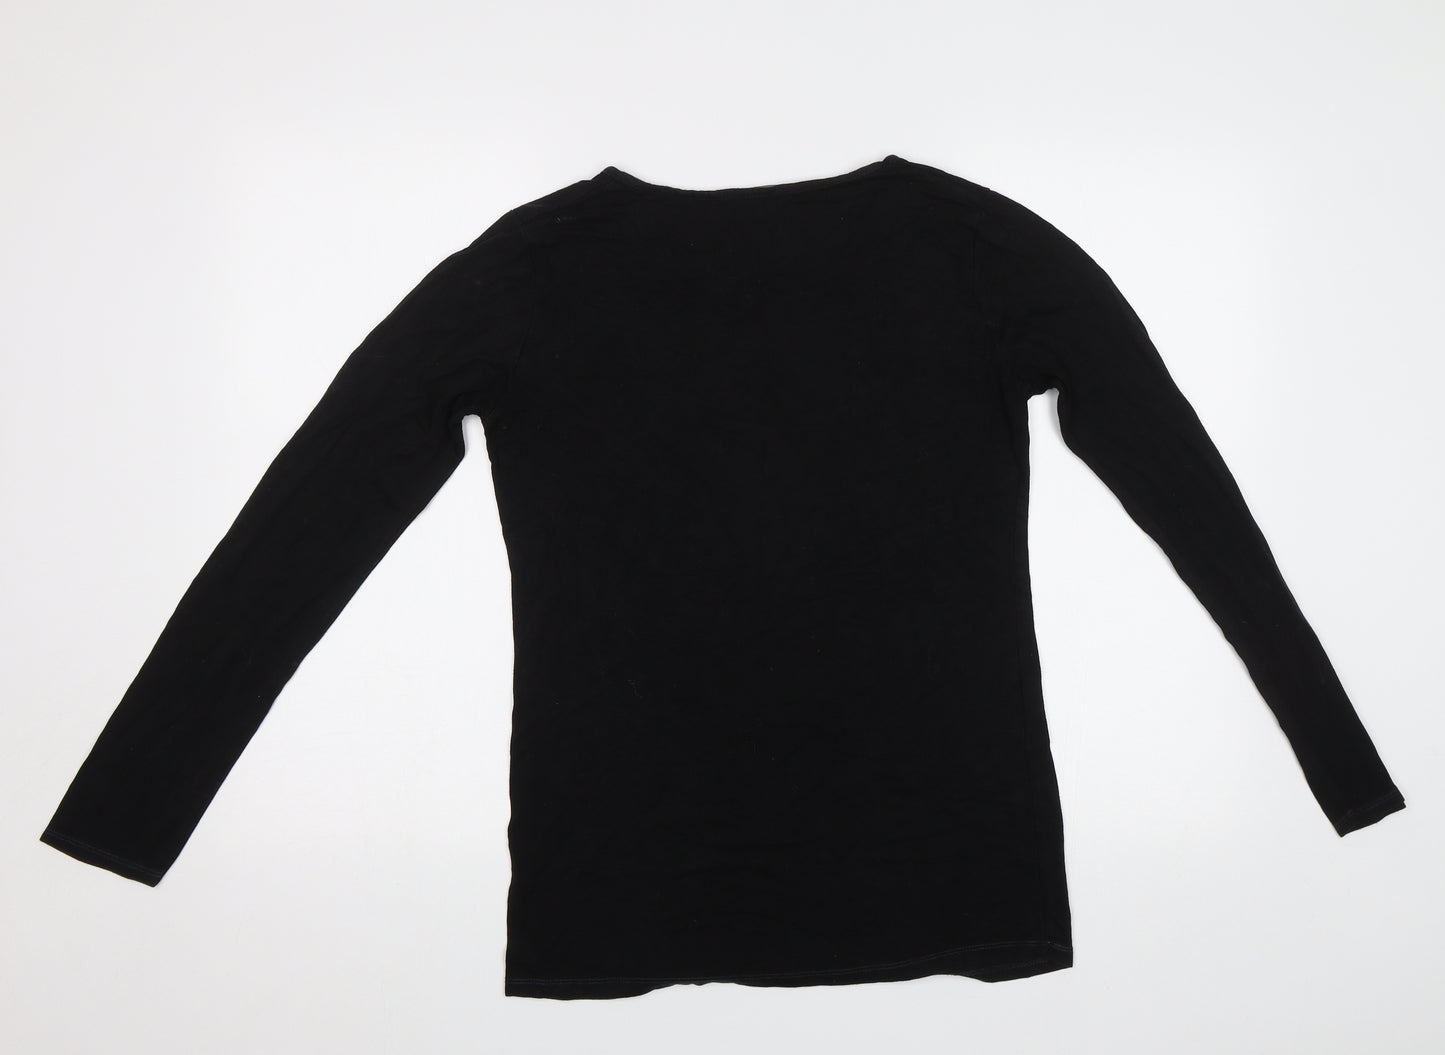 Obsession Womens Black   Basic Polo Size M